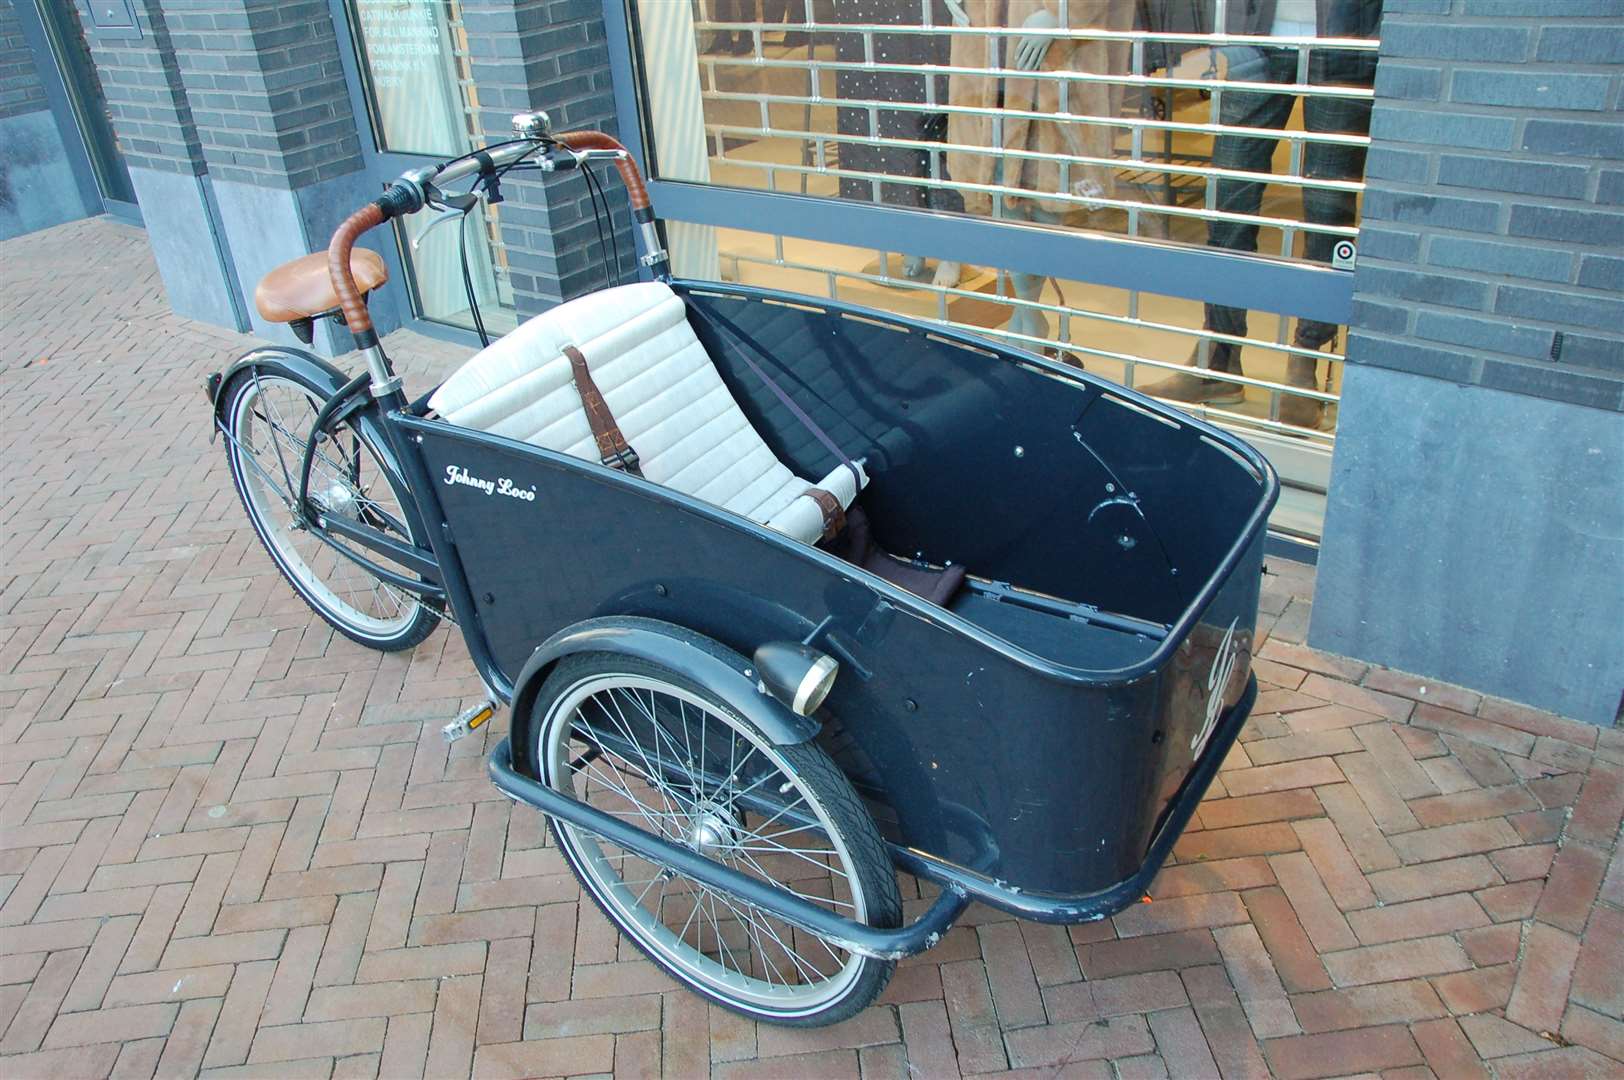 A typical Dutch bike for carrying children to school or shopping.